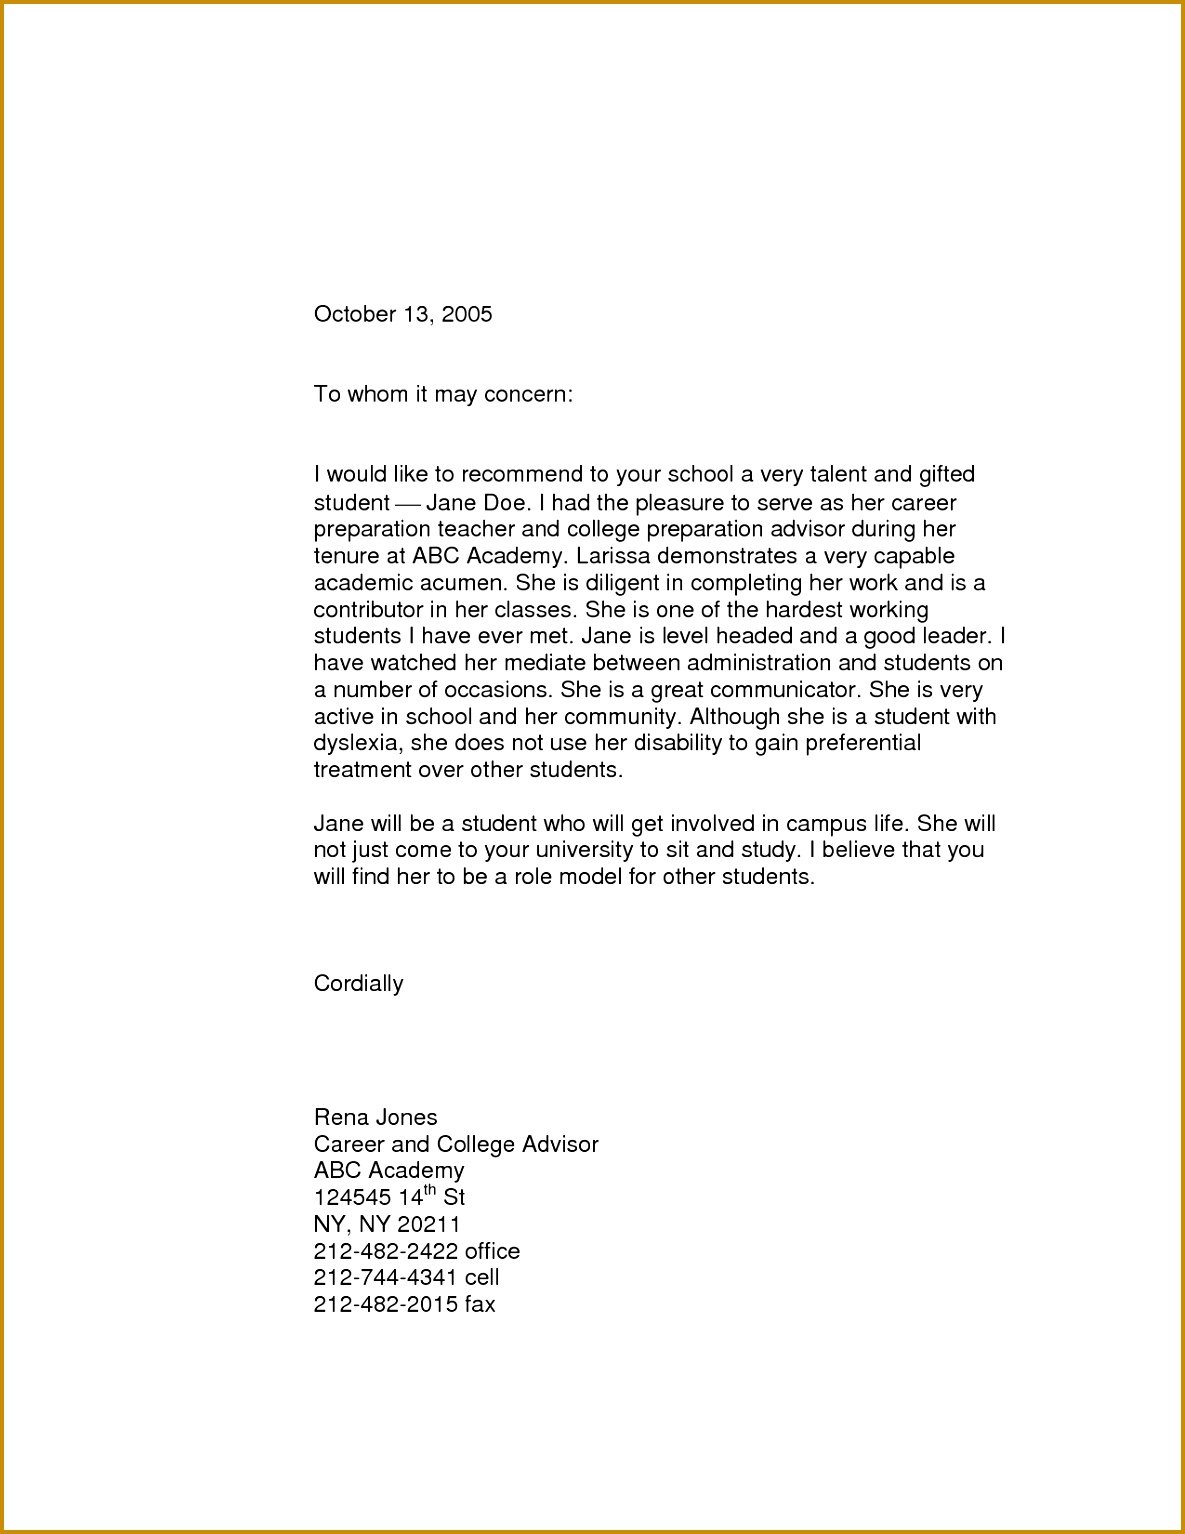 Sample Letter Re mendation for Middle School Student Ideas 11851534